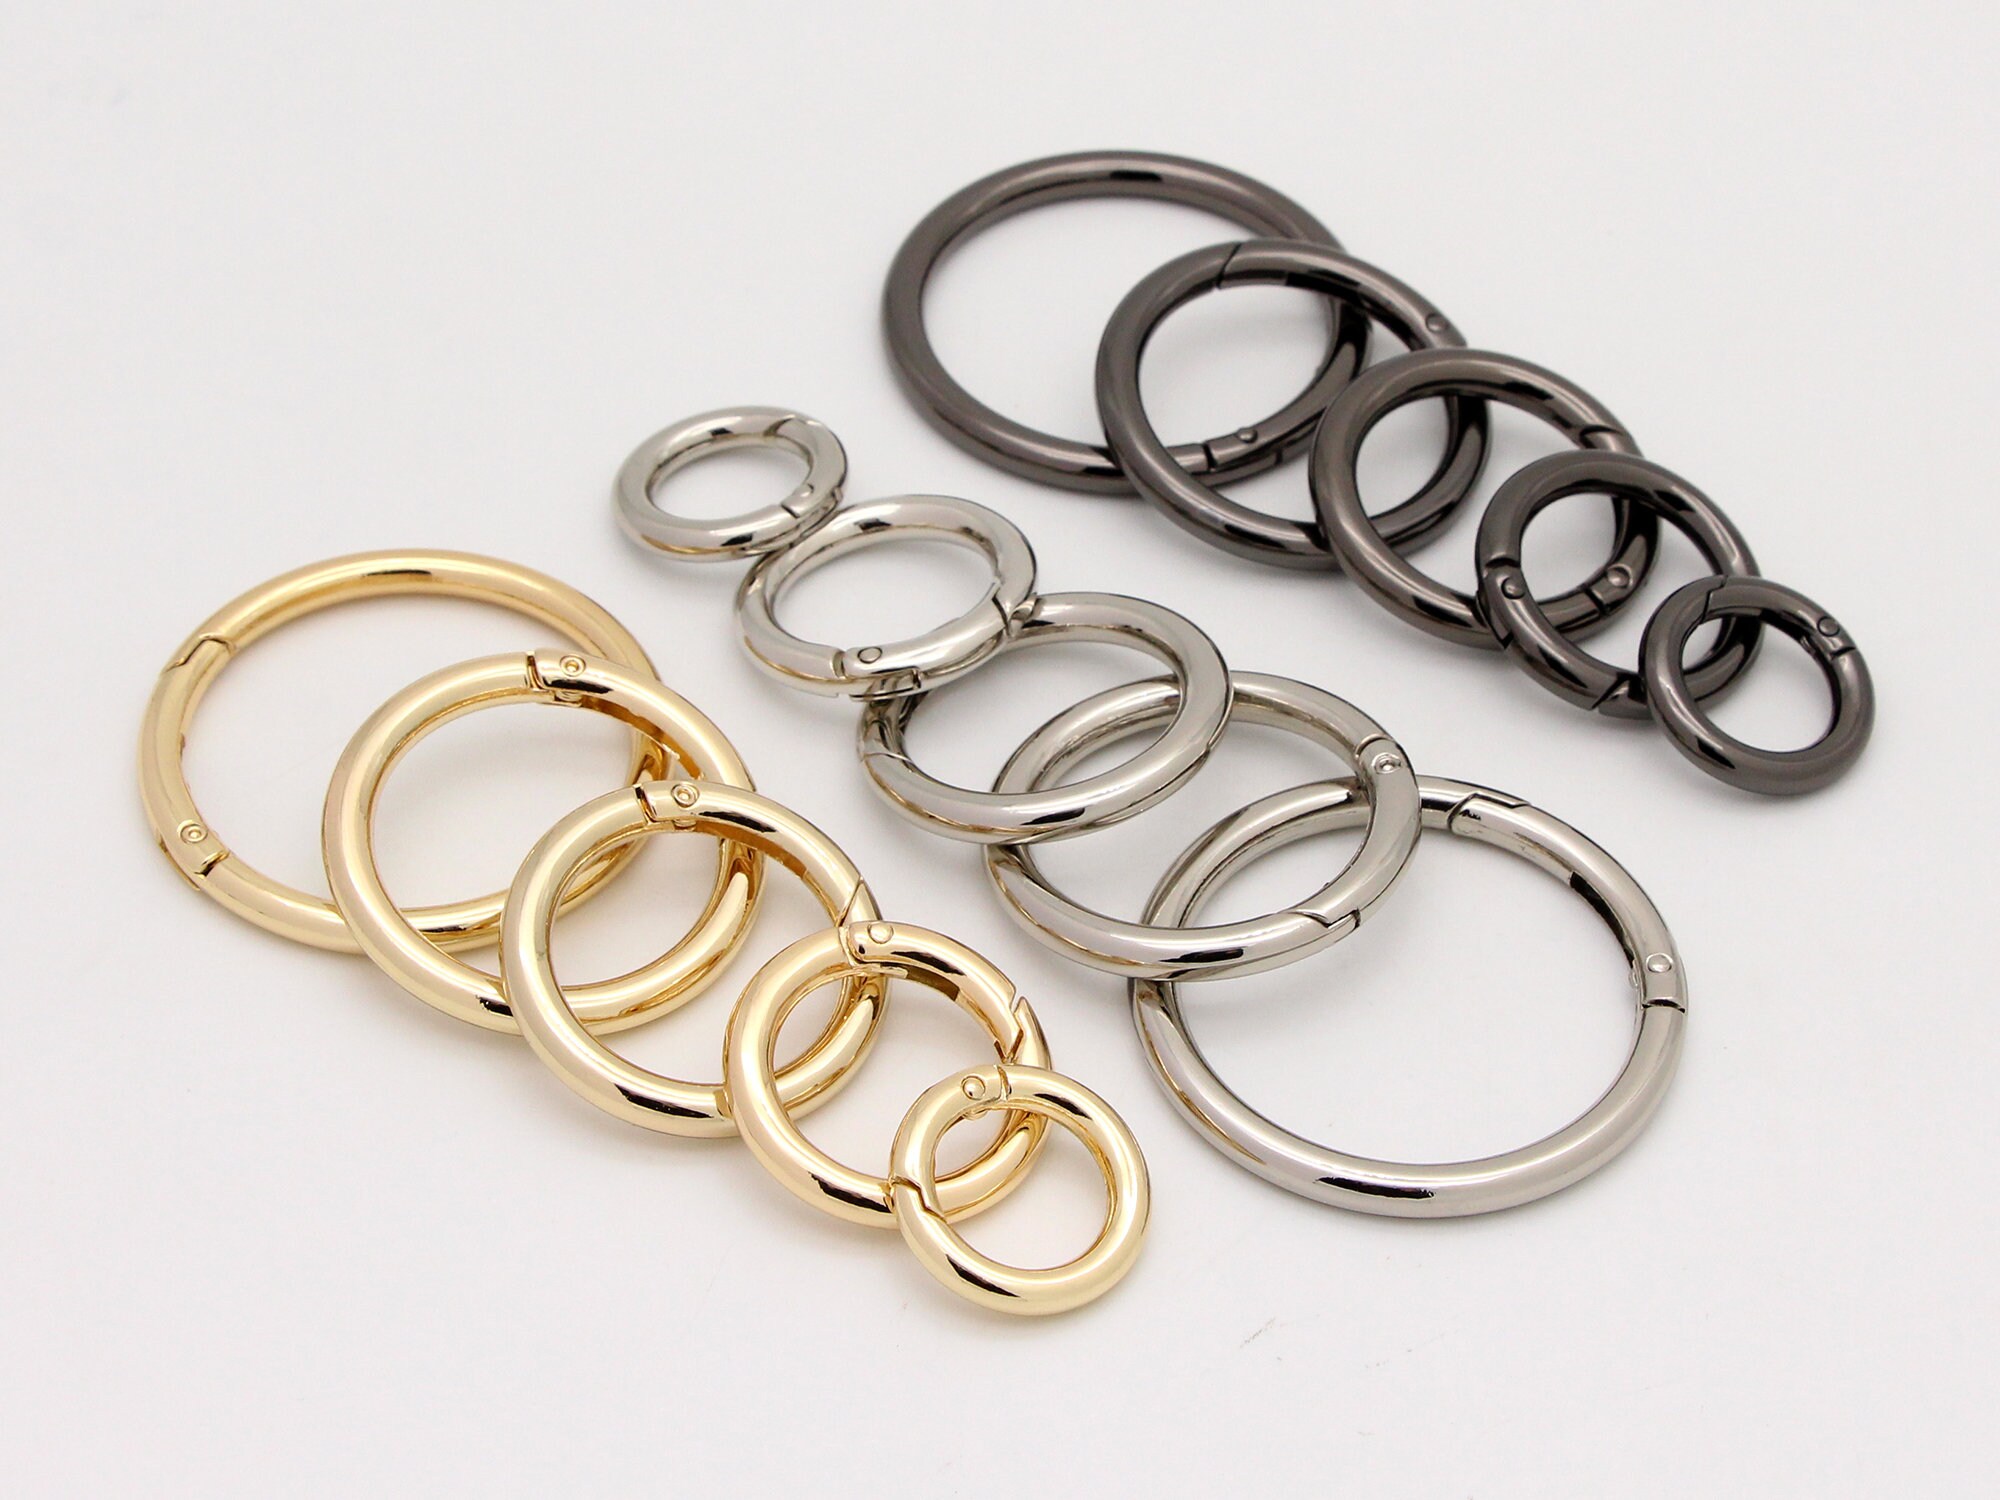 1Pc Stainless Steel Spring Gate Ring O Ring Antique Silver Color Clasp Ring  Shaped Charms Circle Connector for DIY Key Ring Making 18x3.5mm 